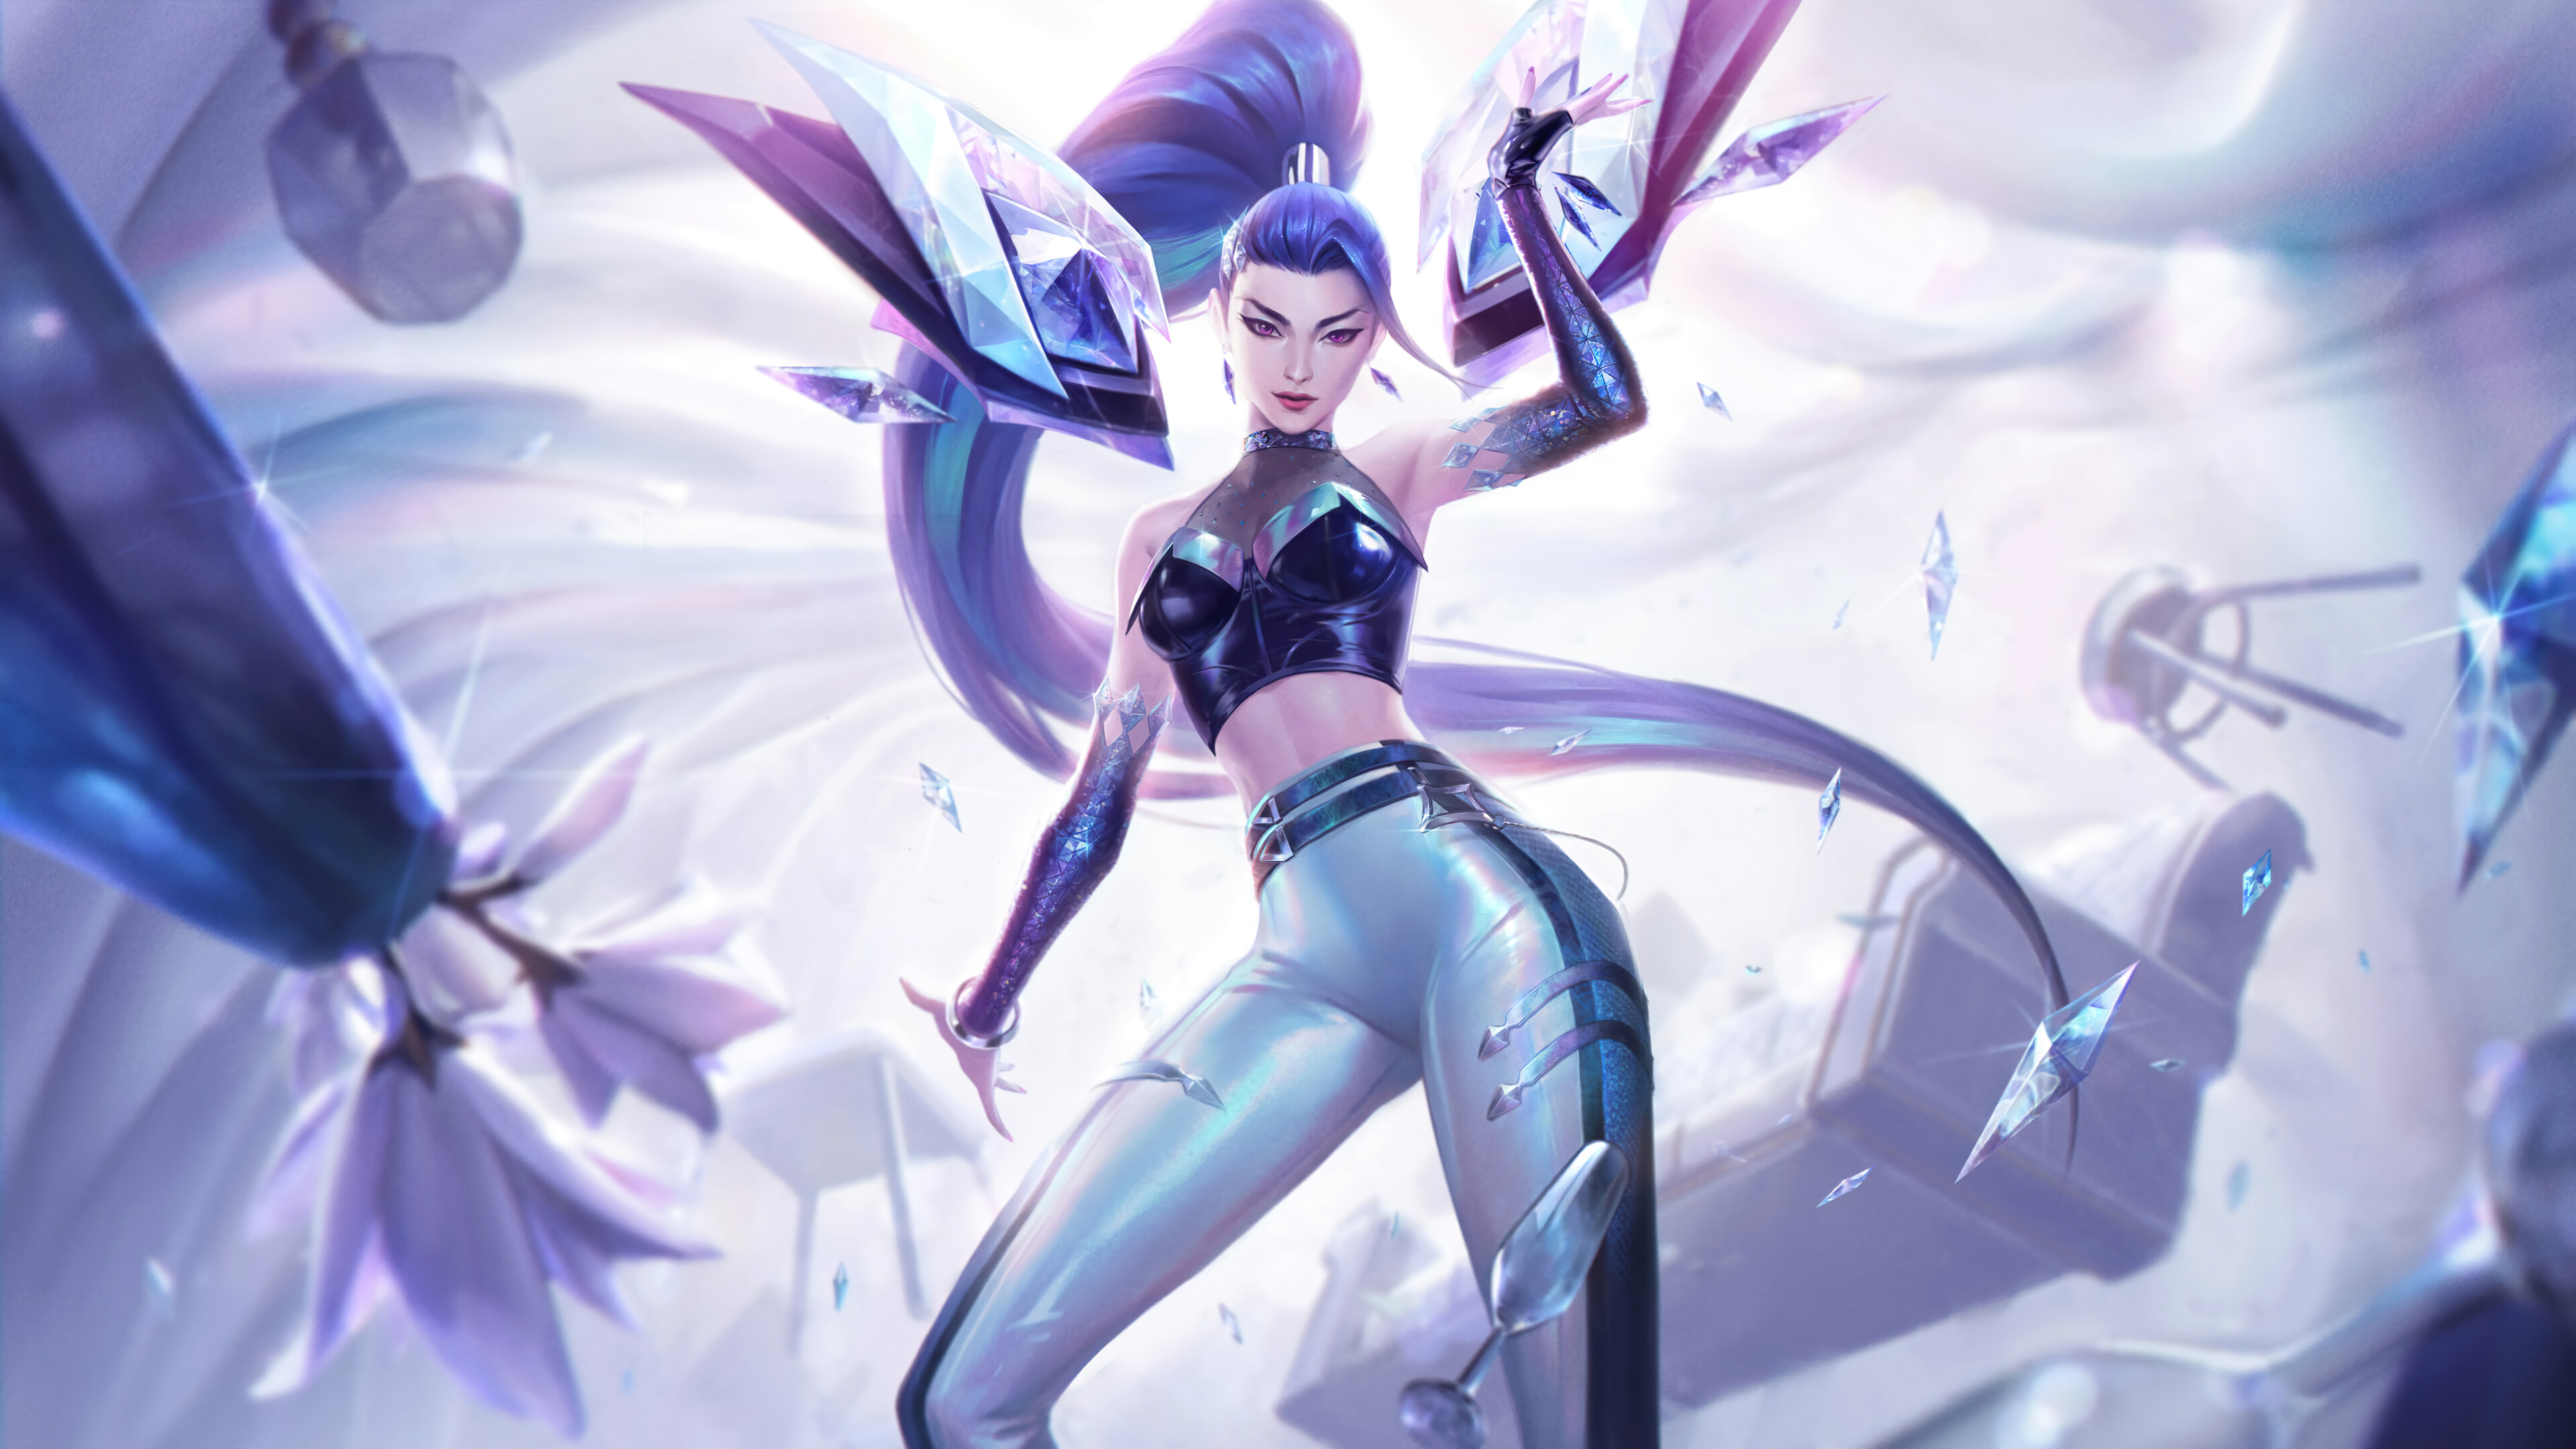 General 3840x2160 Kai'Sa (League of Legends) K/DA Riot Games music Adcarry ADC 4K GZG video game characters digital art